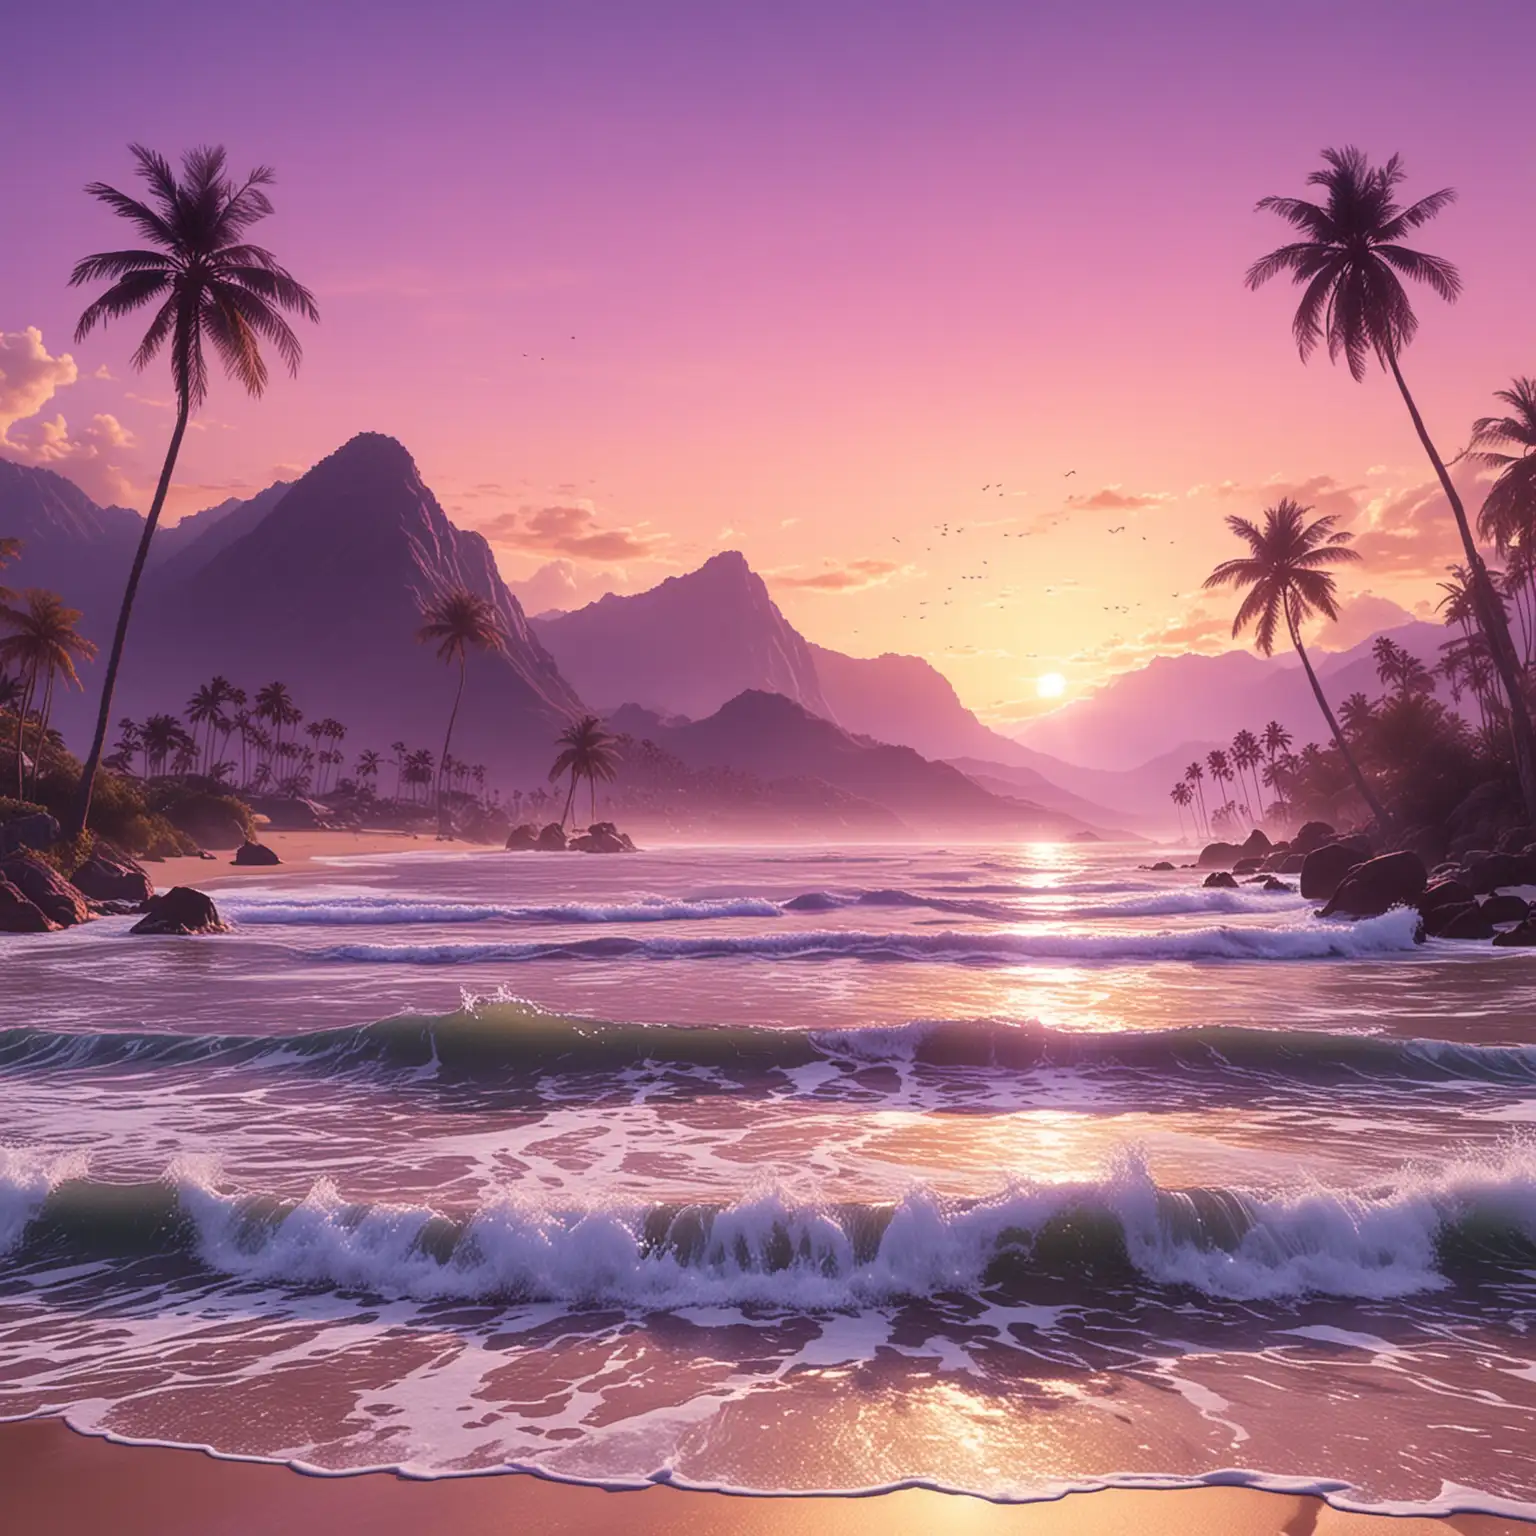 sunset with light and light purple sky, behind mountains with palm trees and ocean waves, soft fun look, seamless